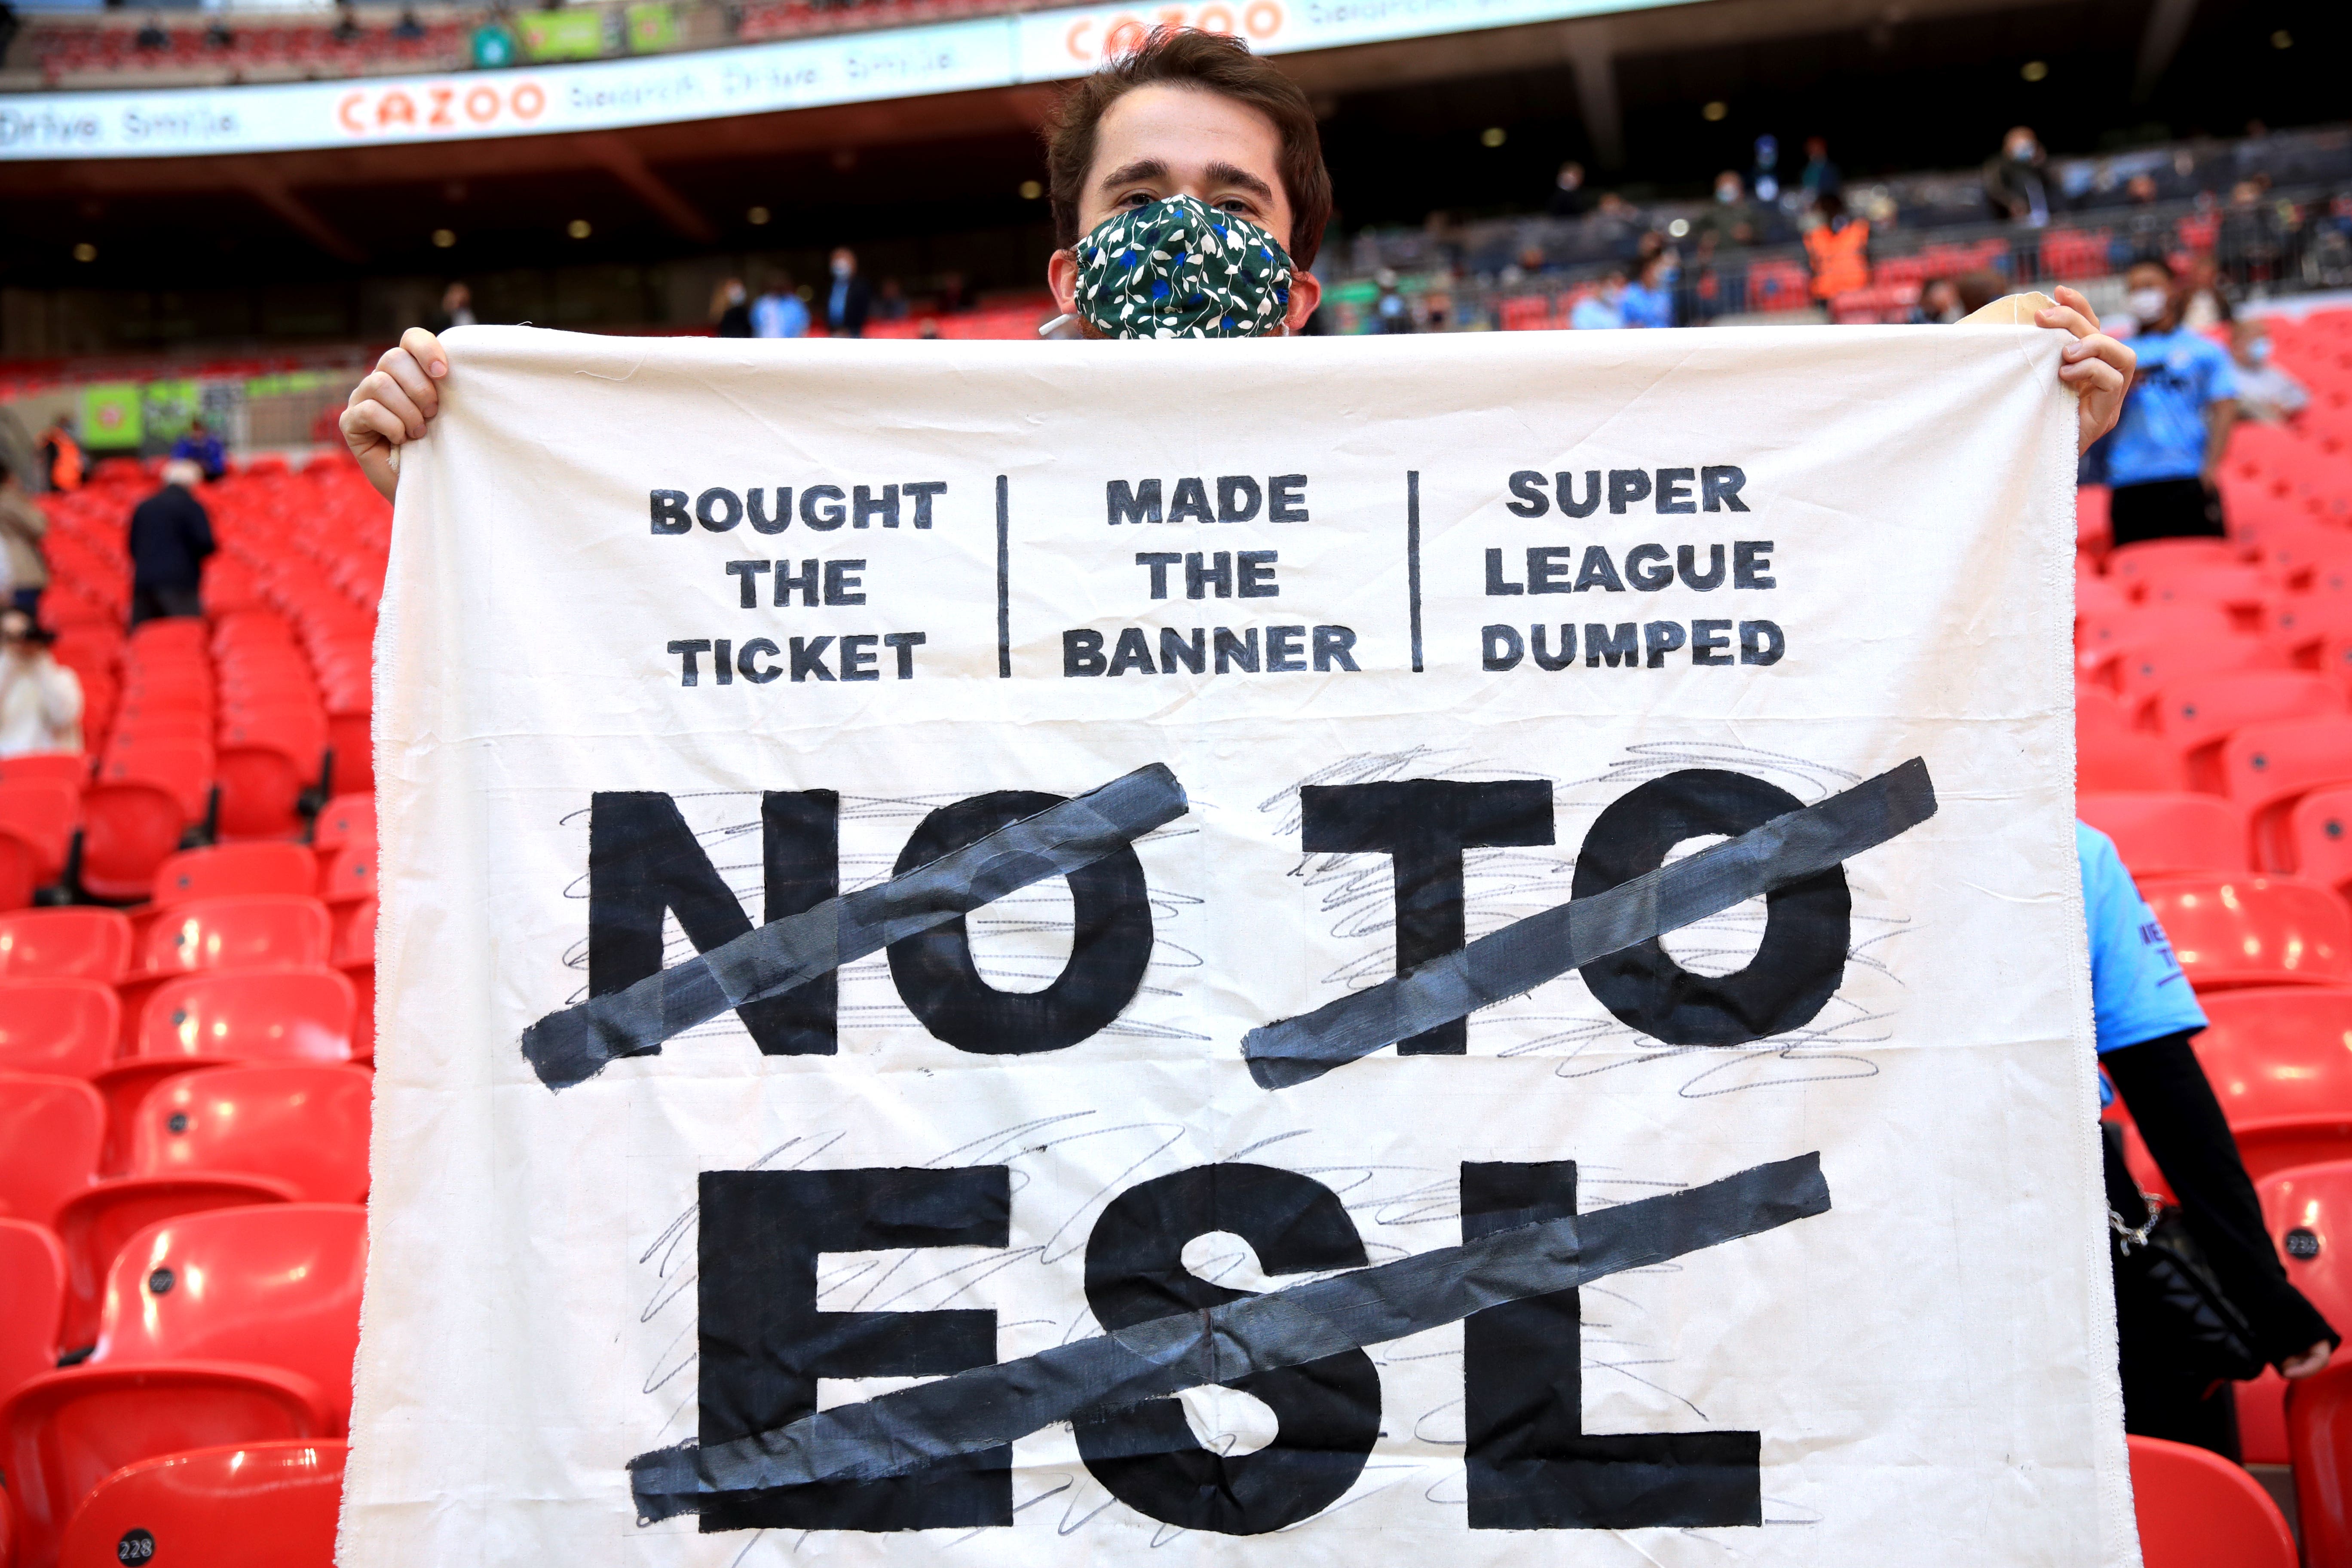 The European Super League verdict was the latest chapter in the fight for football’s future